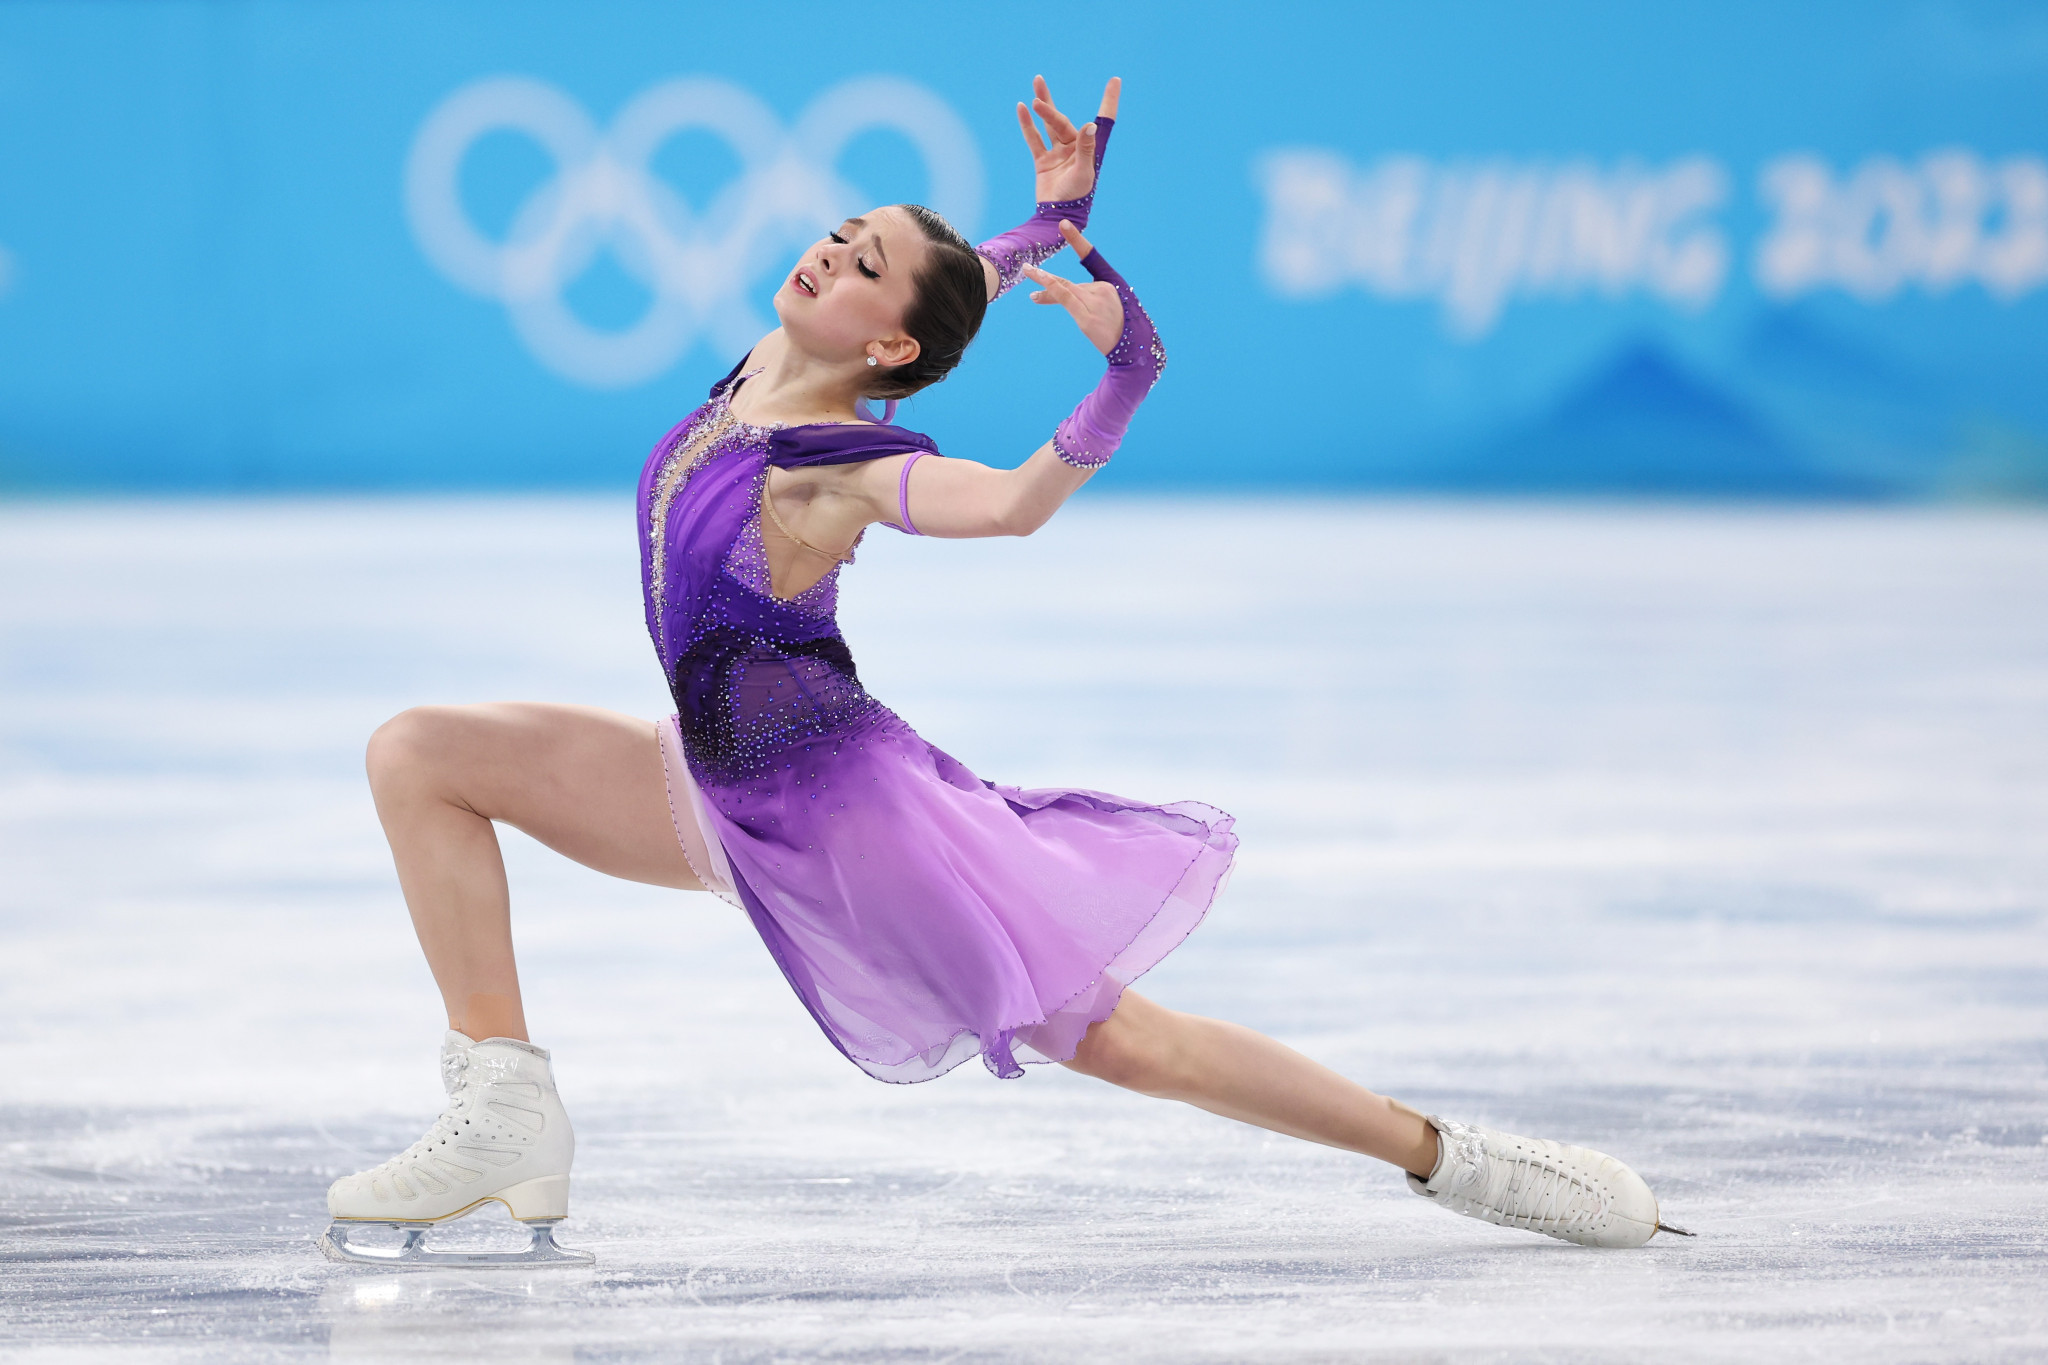 Among the problems that Russian Figure Skating Federation Acting President Alexander Kogan has inherited is the controversy surrounding teenager Kamila Valieva after her positive drugs test ©Getty Images